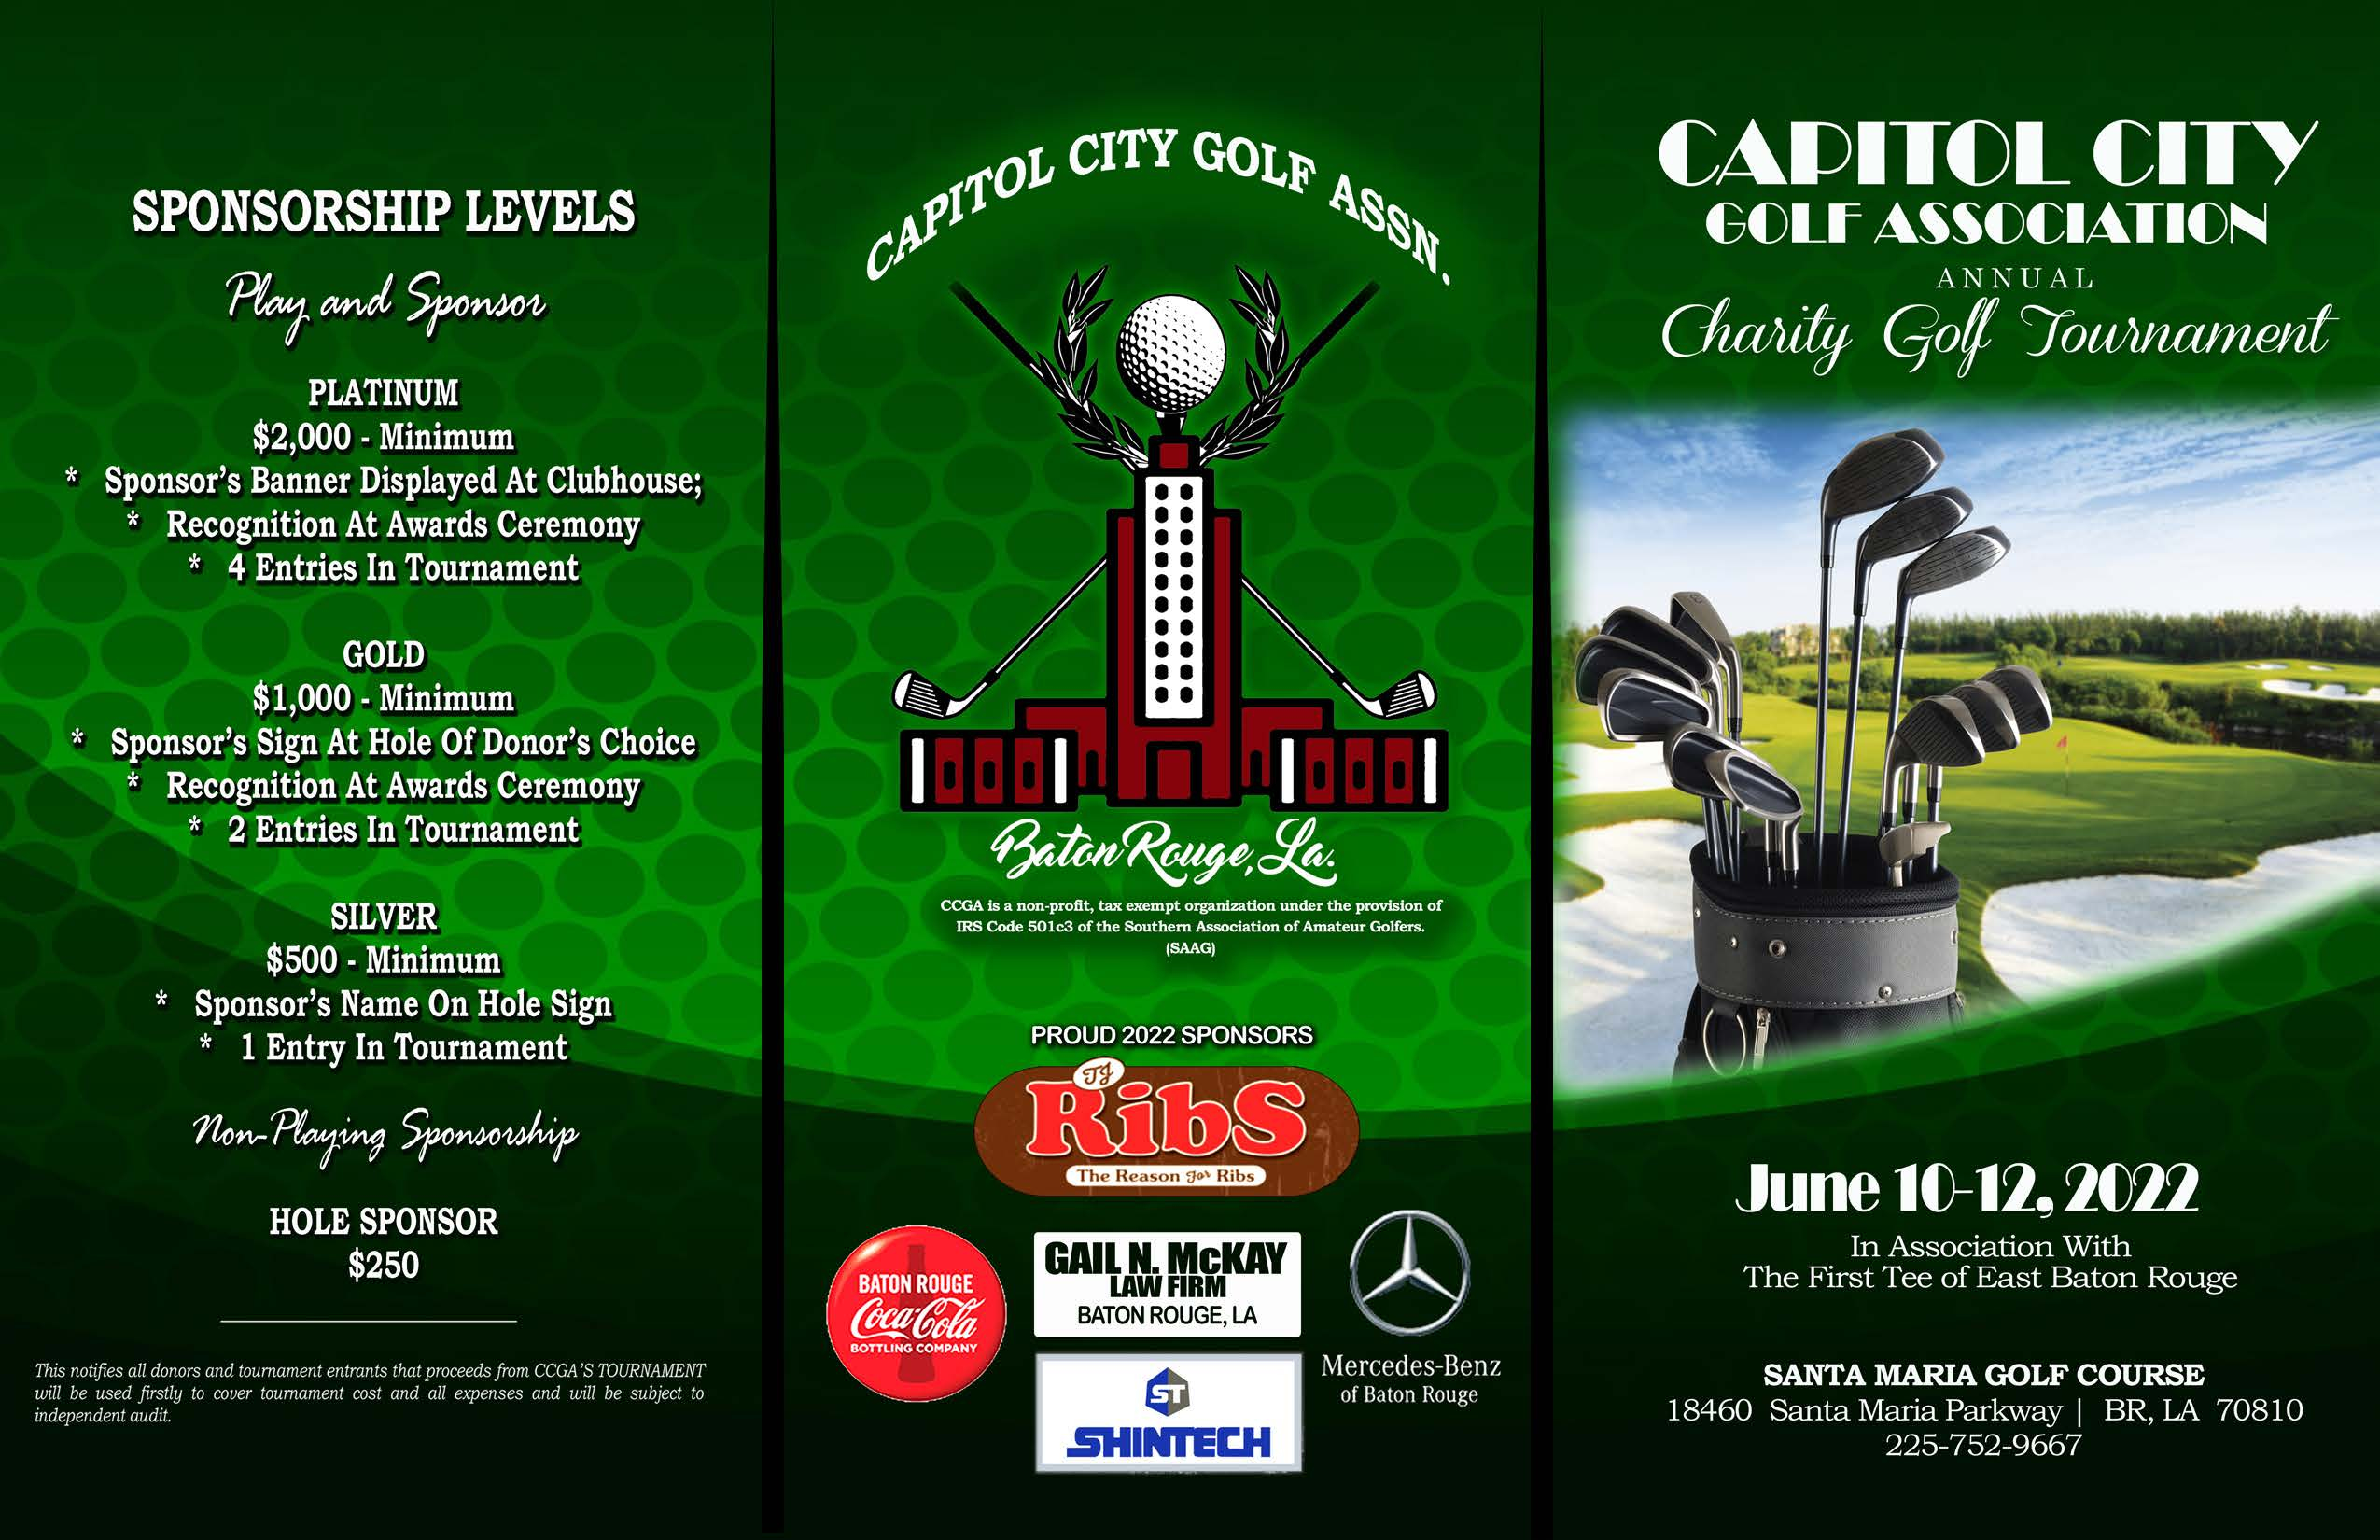 Welcome to Capitol City Golf Association